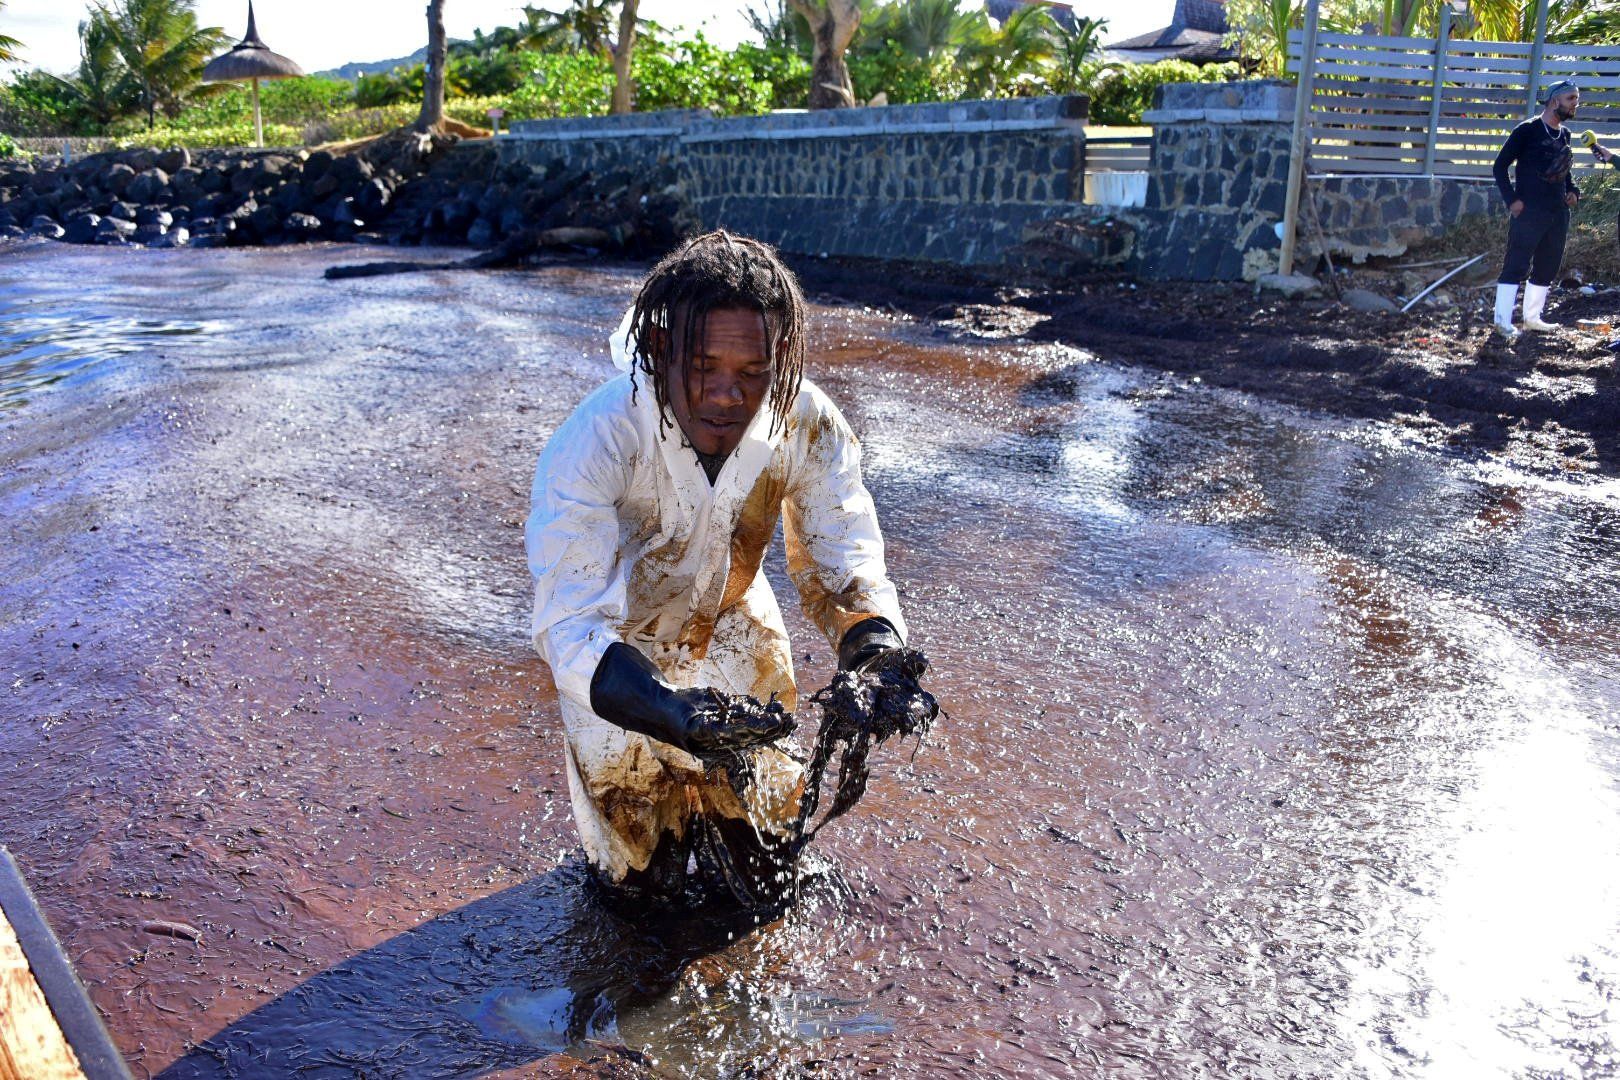 crews in the mauritius oil spill